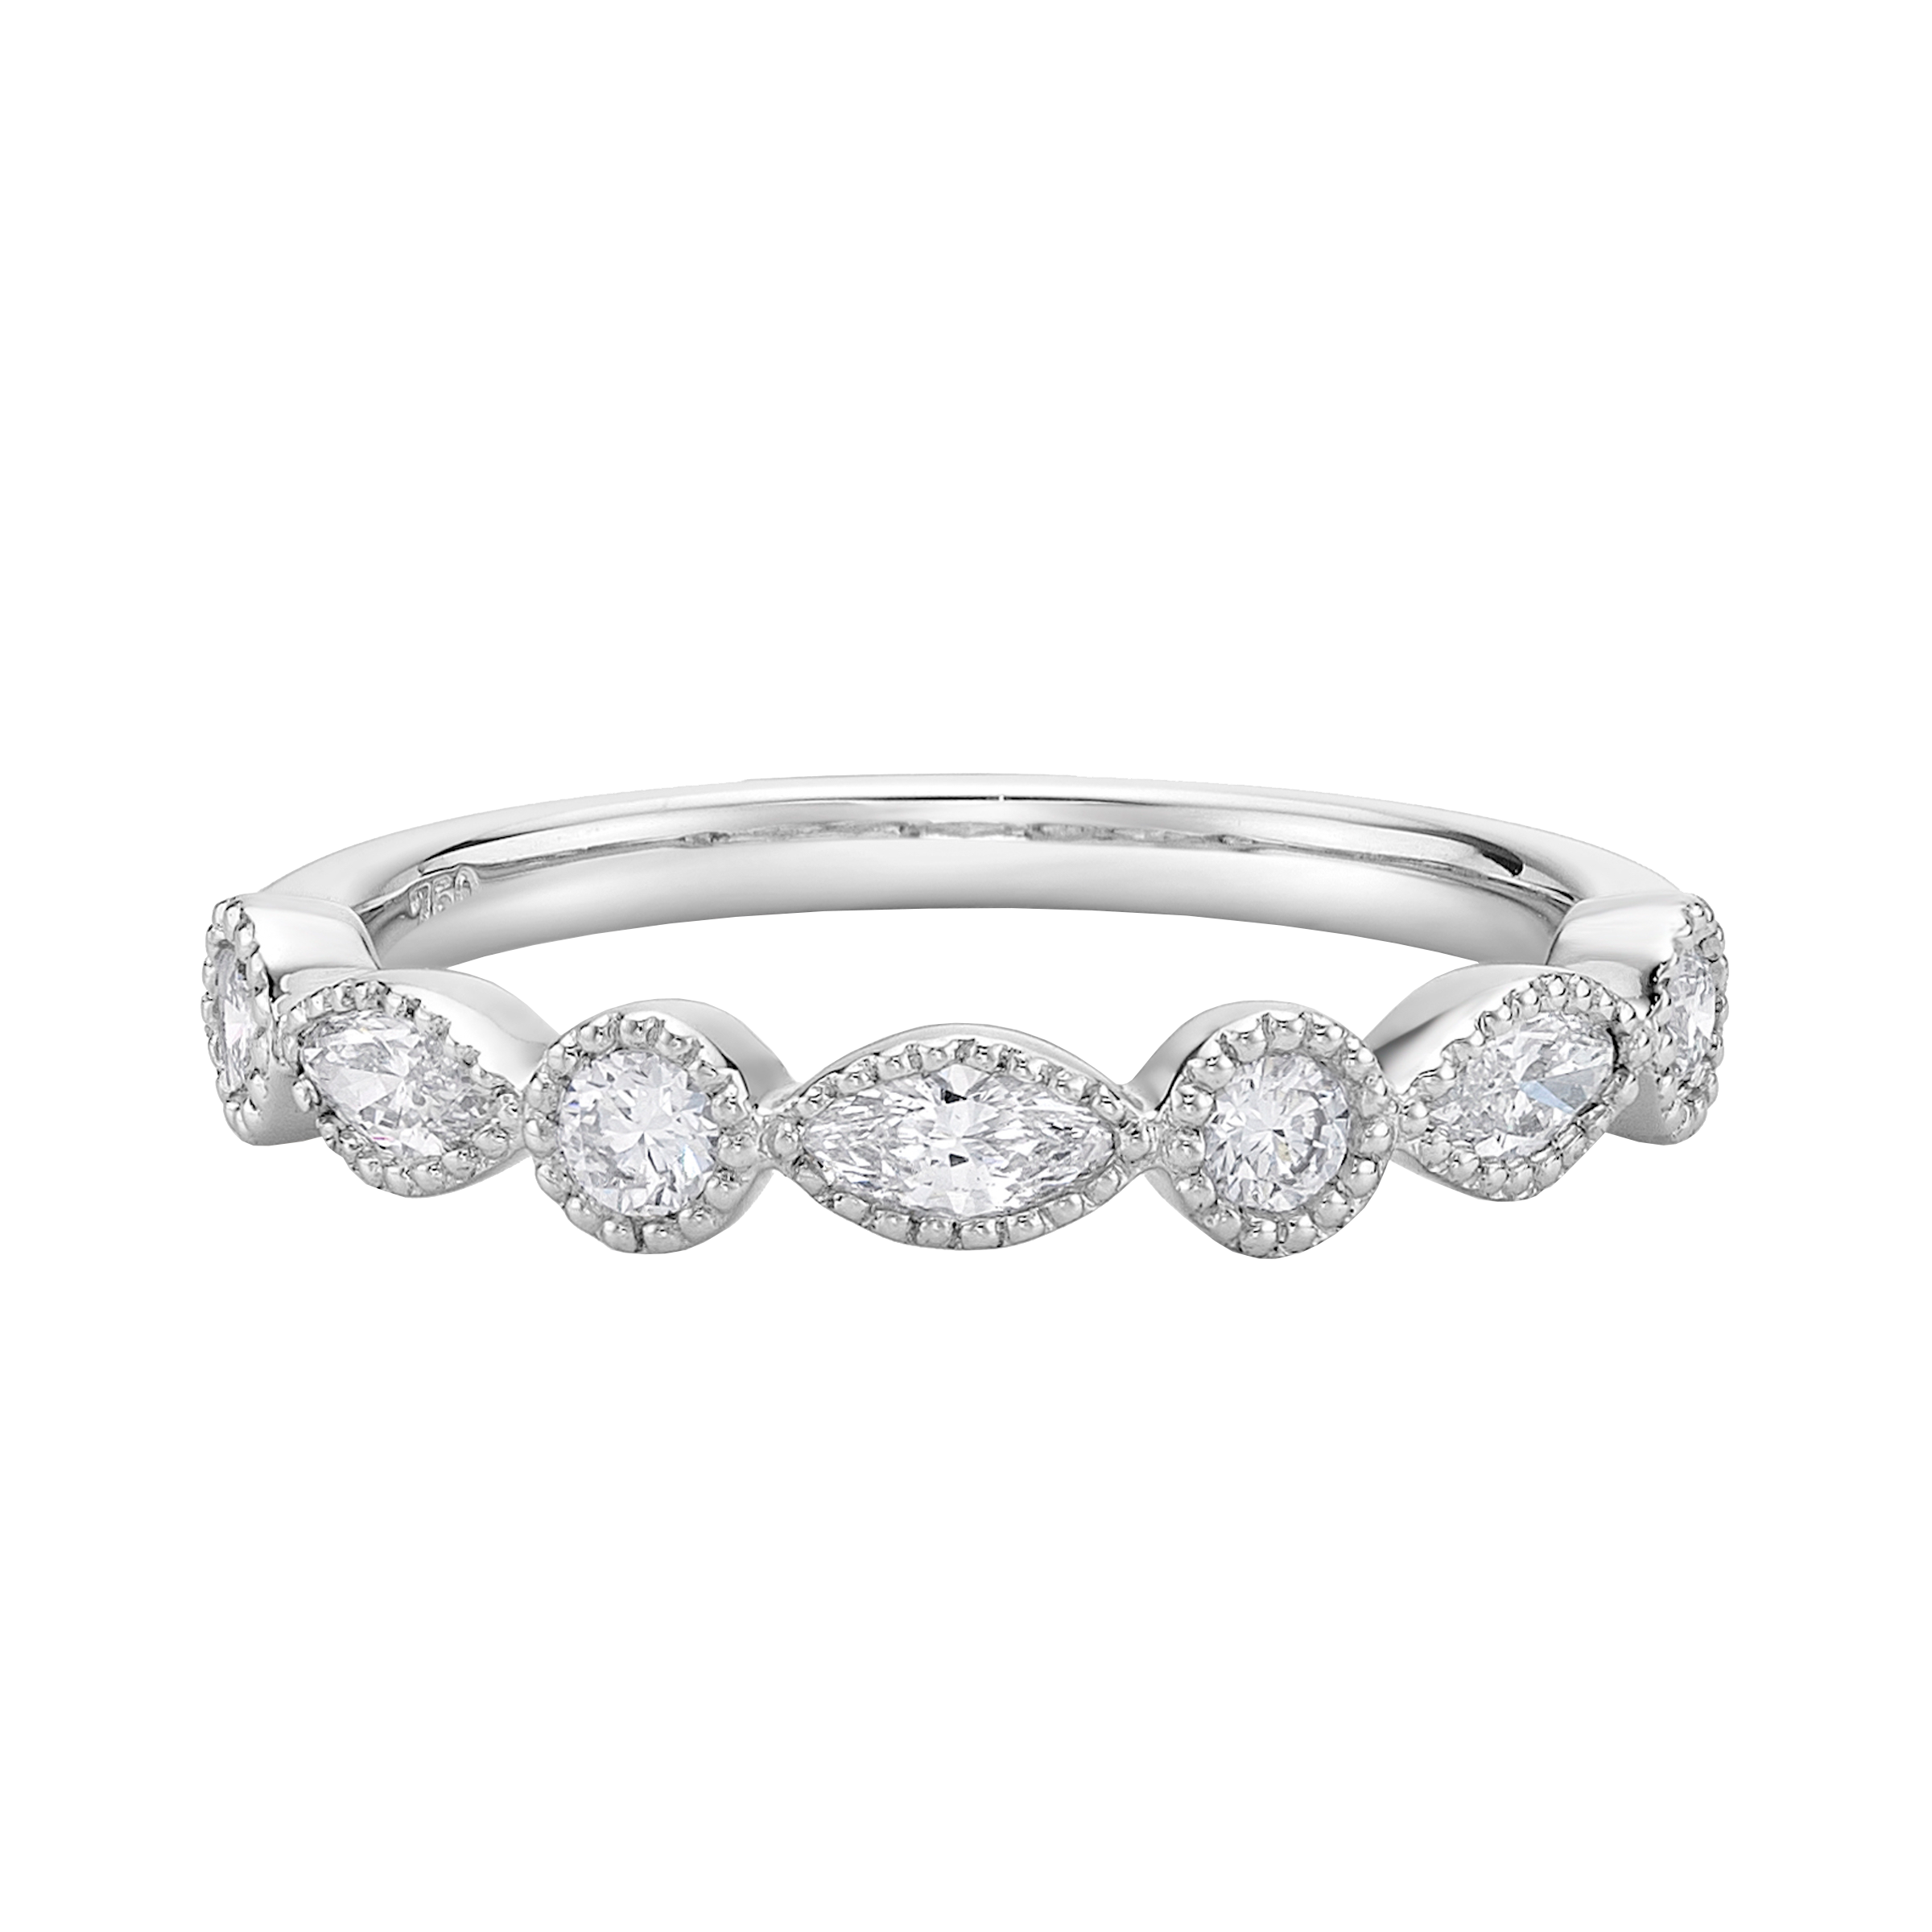 VINTAGE INSPIRED MIXED CUT DIAMOND WEDDING ETERNITY RING WITH MILLEGRAIN EDGE